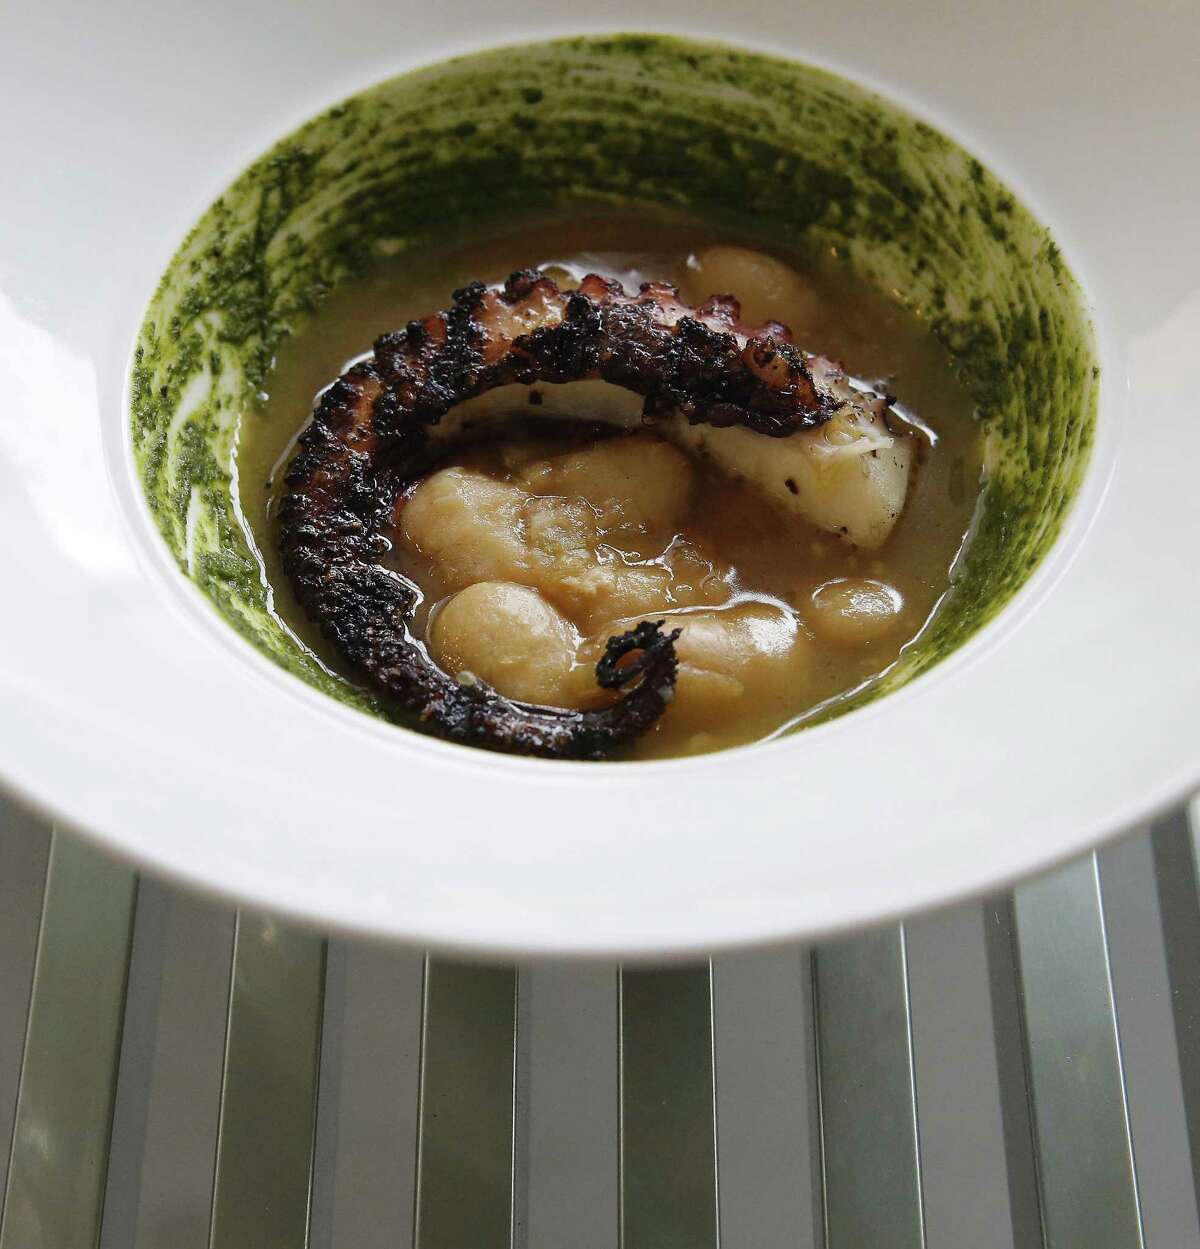 Char-grilled Spanish Octopus with braised corona beans and a basil pistou at Rebelle